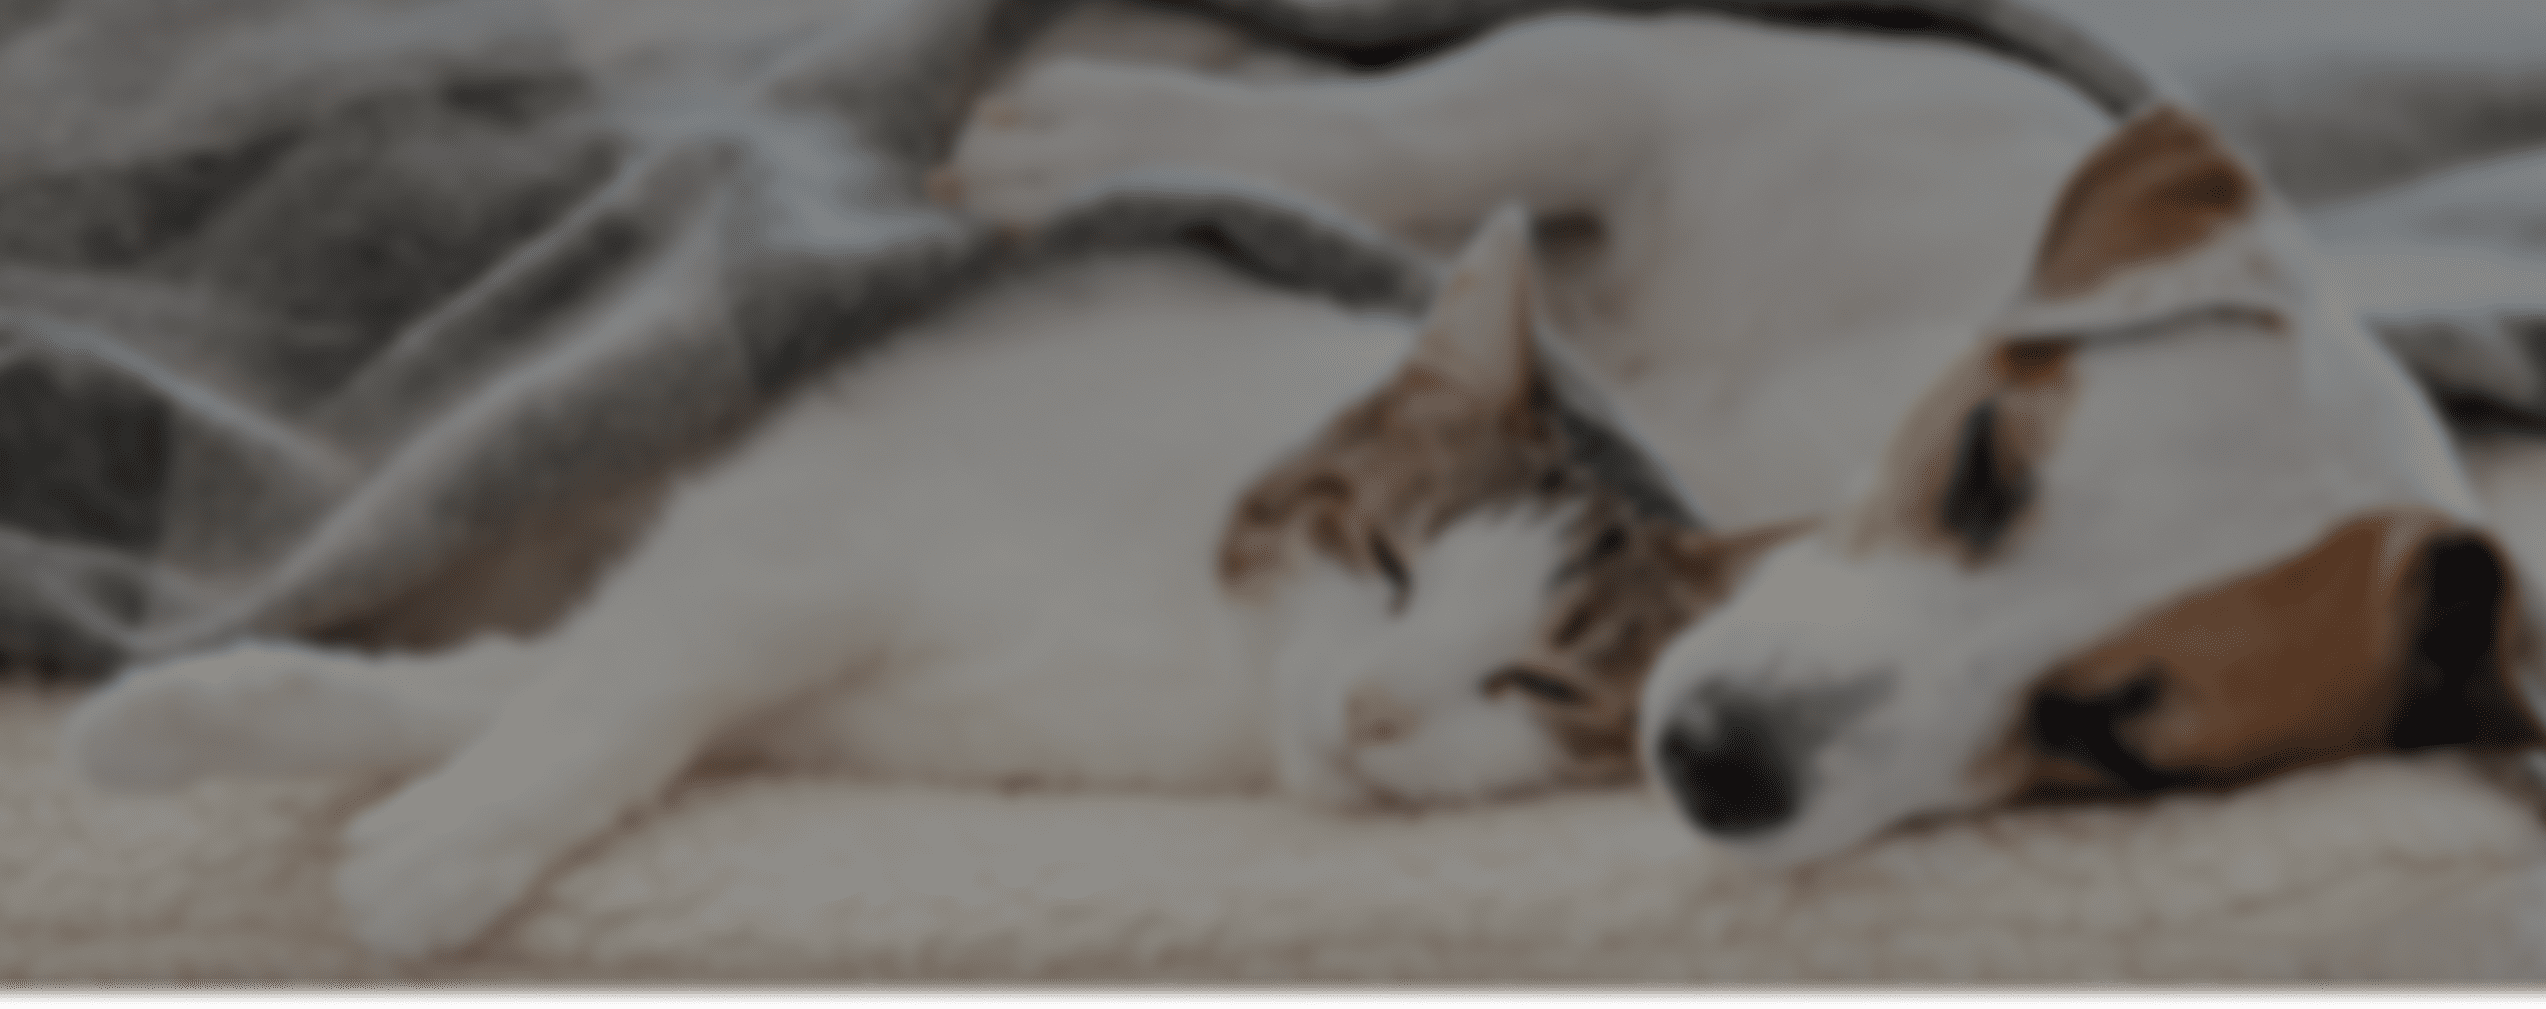 cat & dog laying together